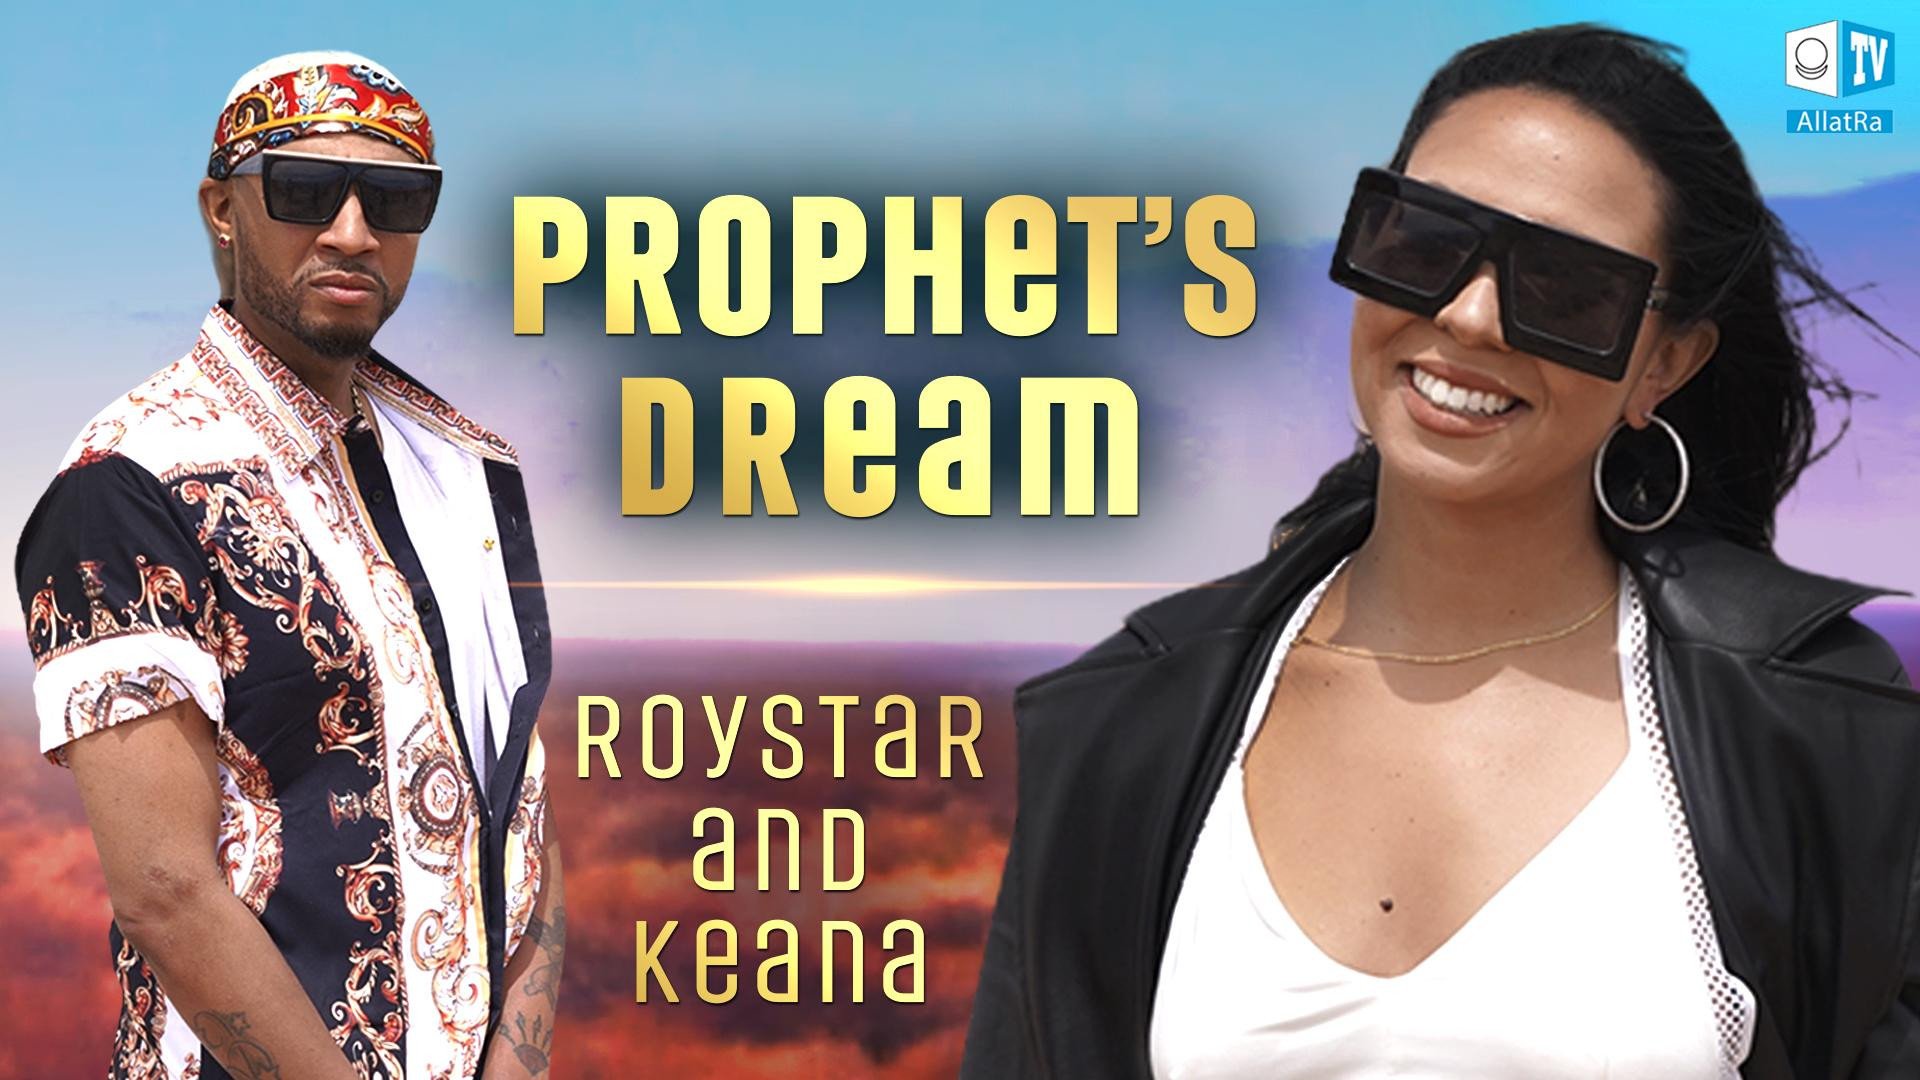 "Prophet's Dream" Song by RoyStar SoundSick and Keana